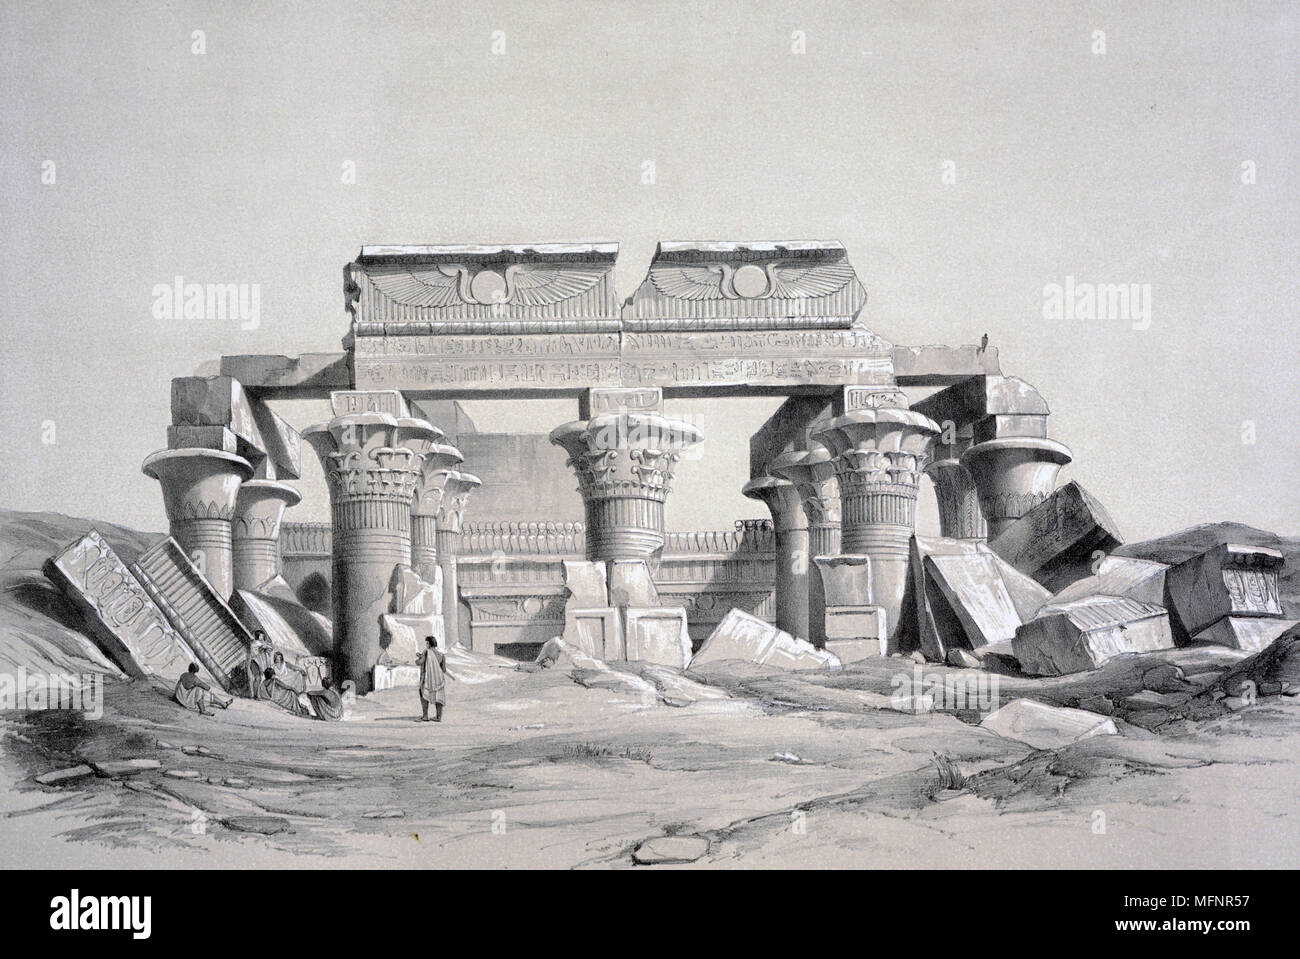 Temple at Kom Ombo. 1843. Lithograph after Owen Jones and Jules Goury. Graeco Temple on the Nile 30 miles north of Aswan, Egypt, built during the Graeco-Roman period  332 BC-395 AD. Dedicated to Sobek and Horus. Religion Mytholgy Stock Photo